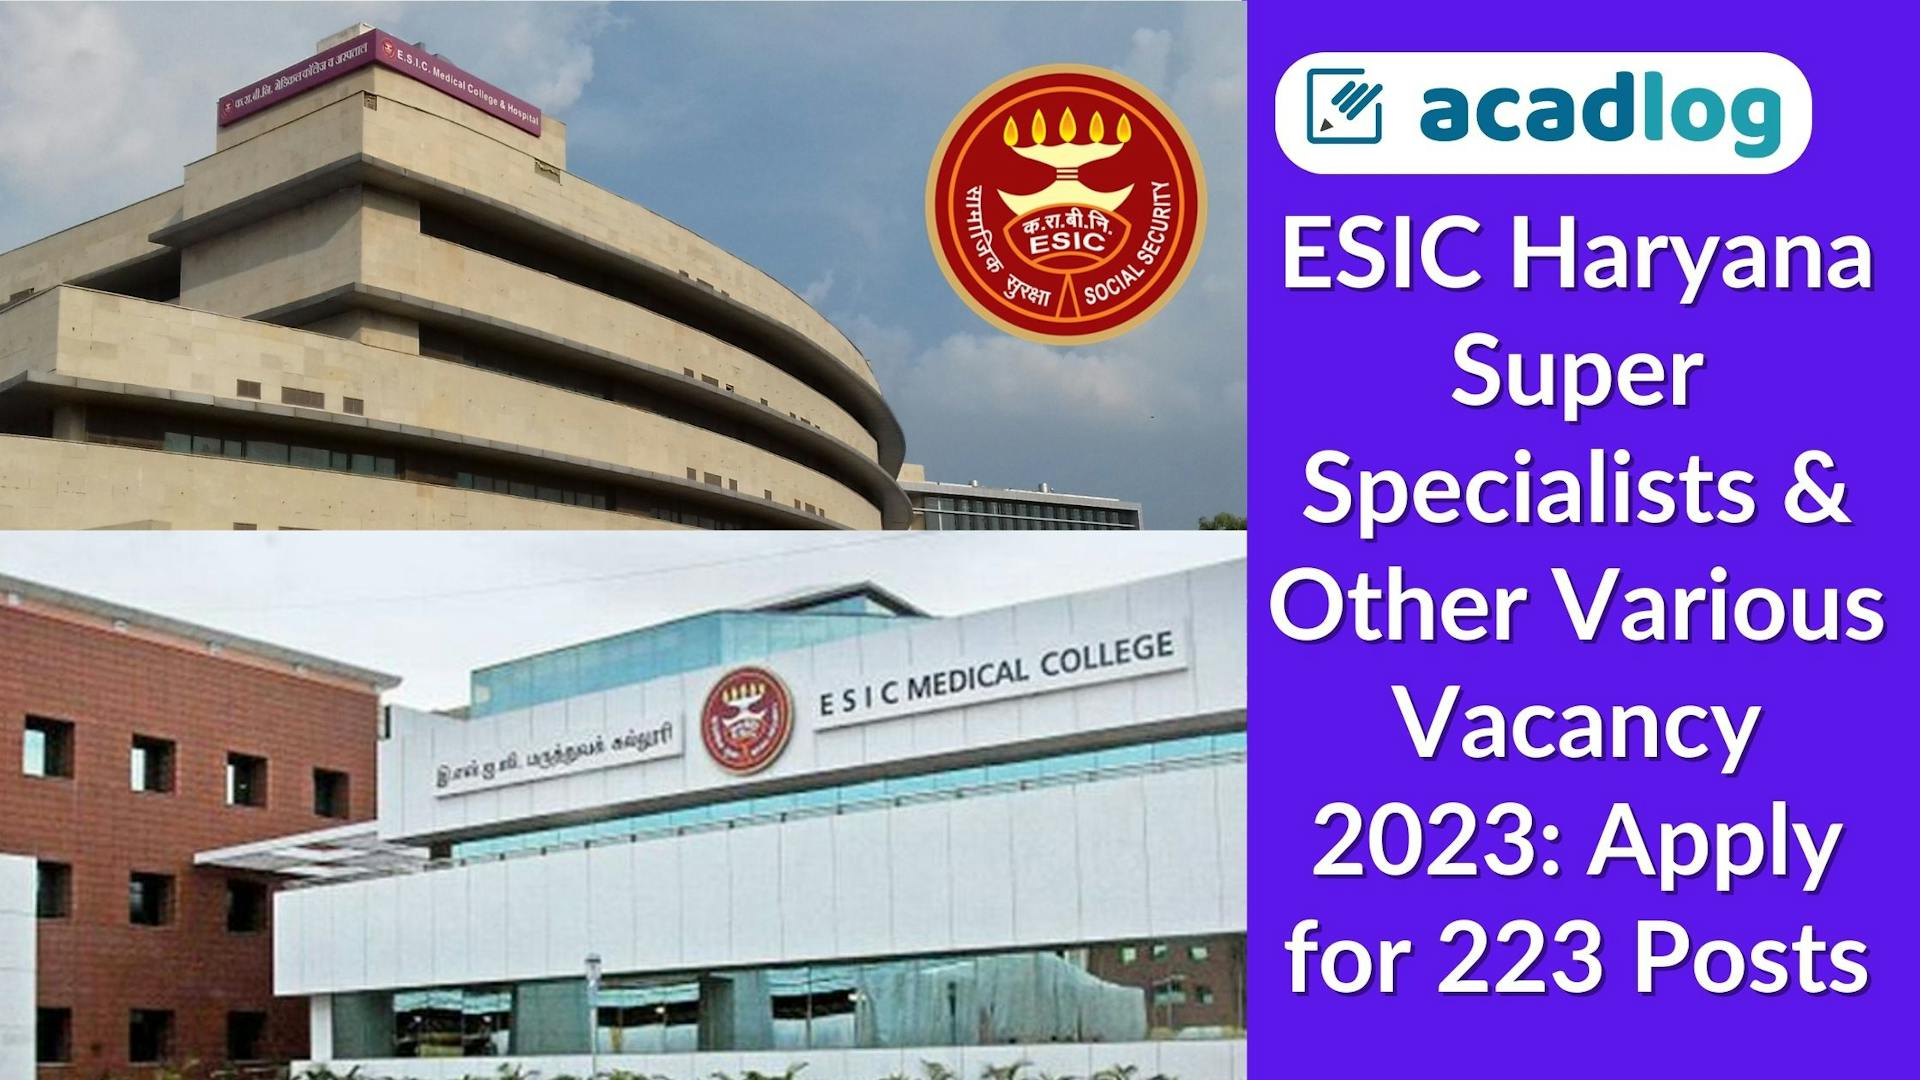 ESIC Haryana Super Specialists & Other Various Vacancy 2023: Apply for 223 Posts